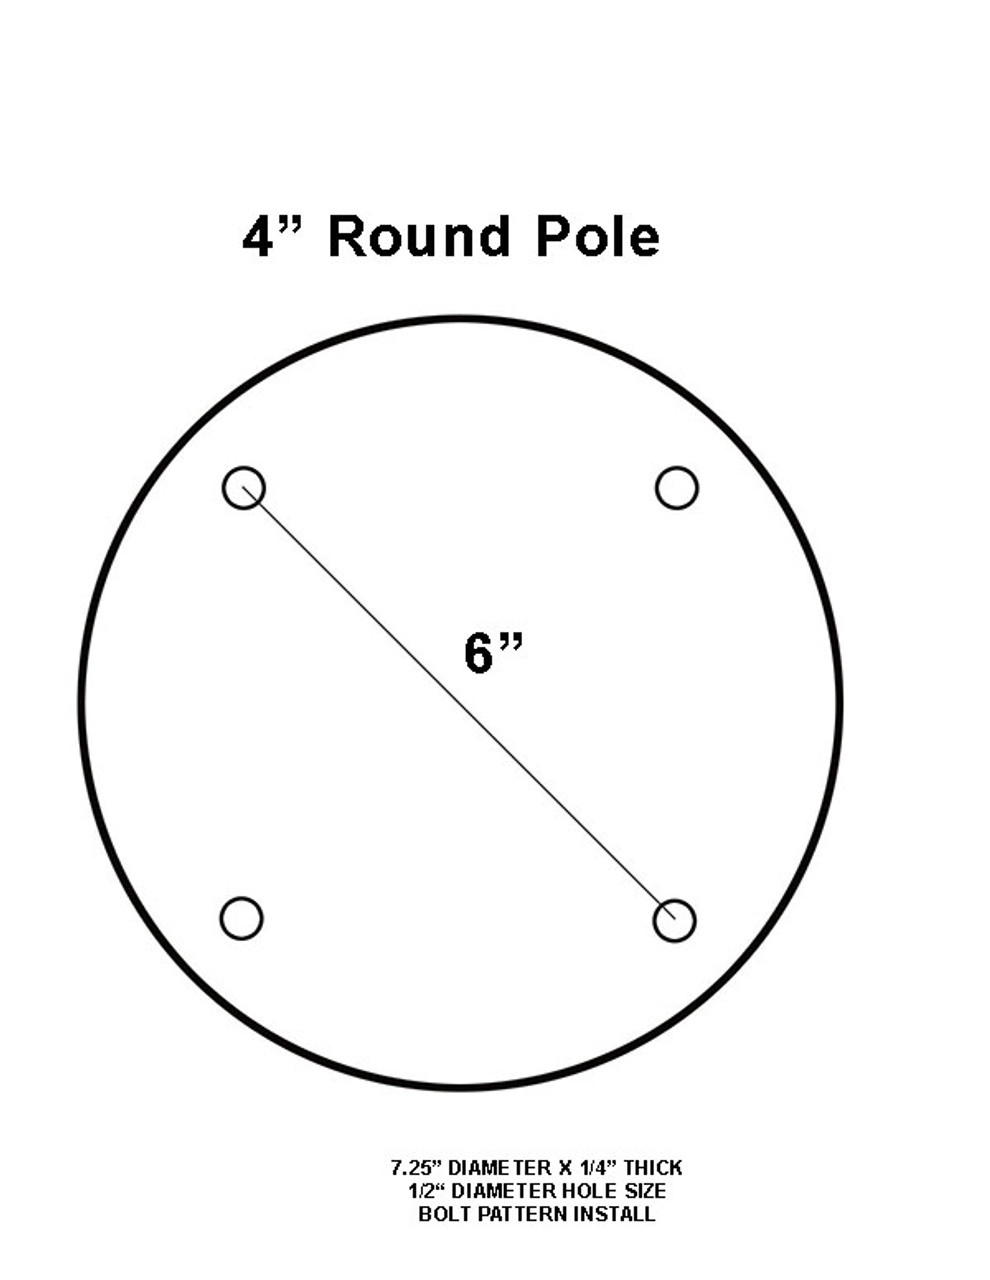 Plate dimensions for SLEEVE or WELDED styles 4" ROUND POLE